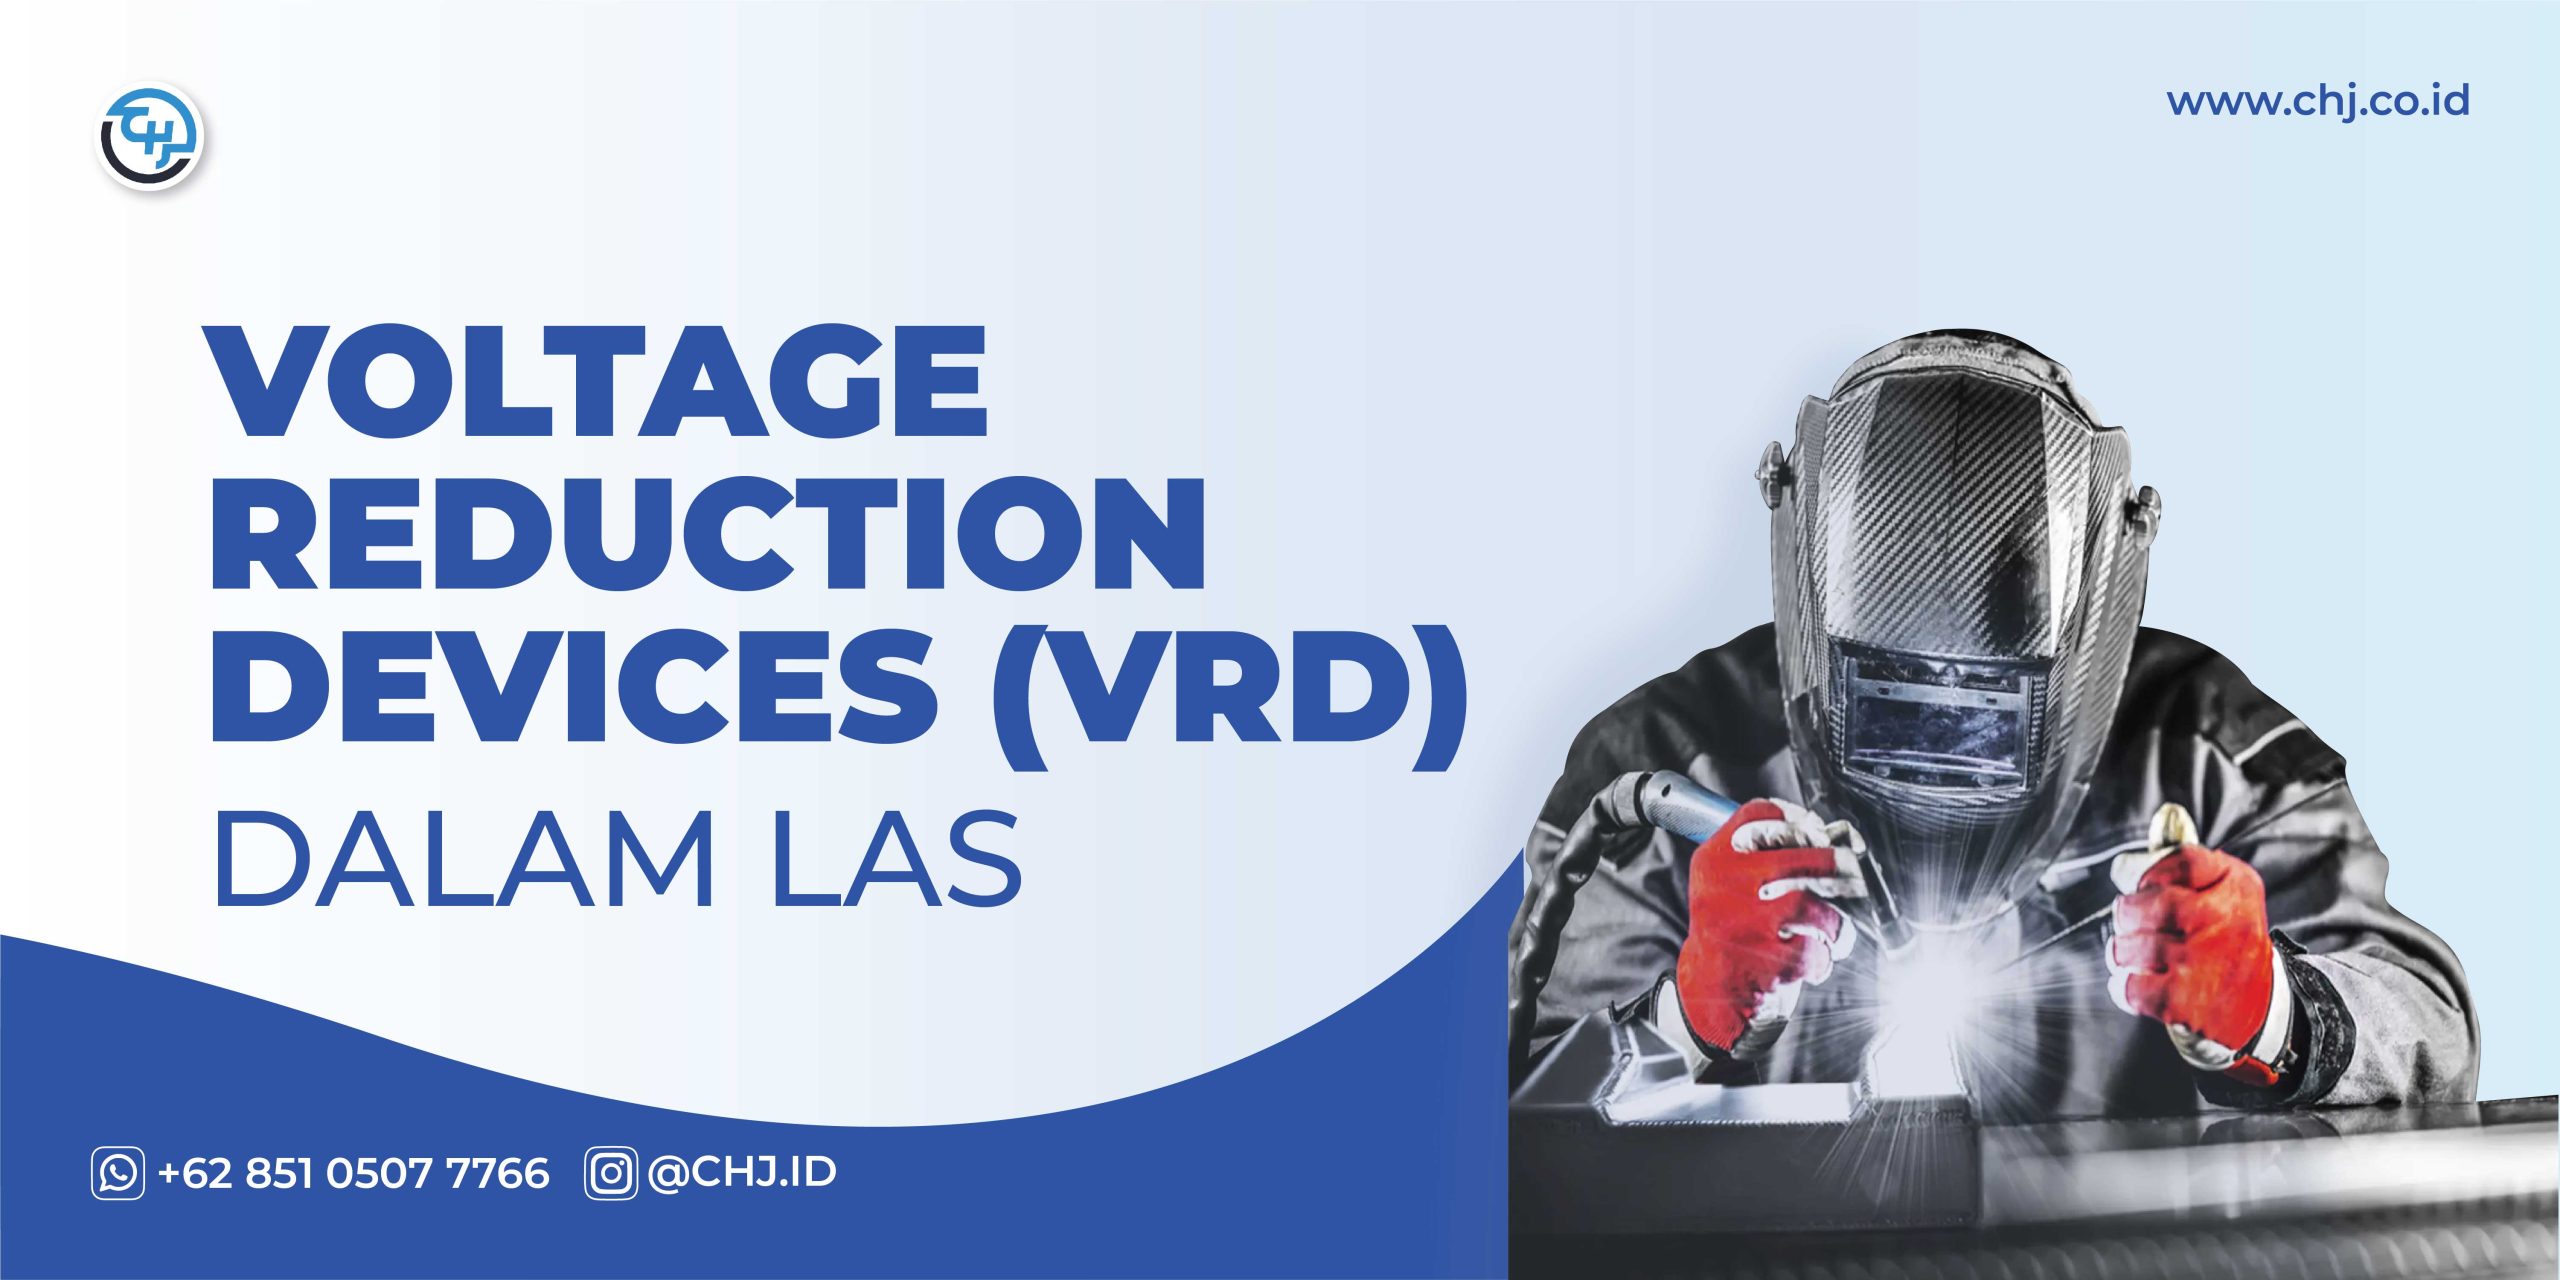 VOLTAGE REDUCTION DEVICES VRD